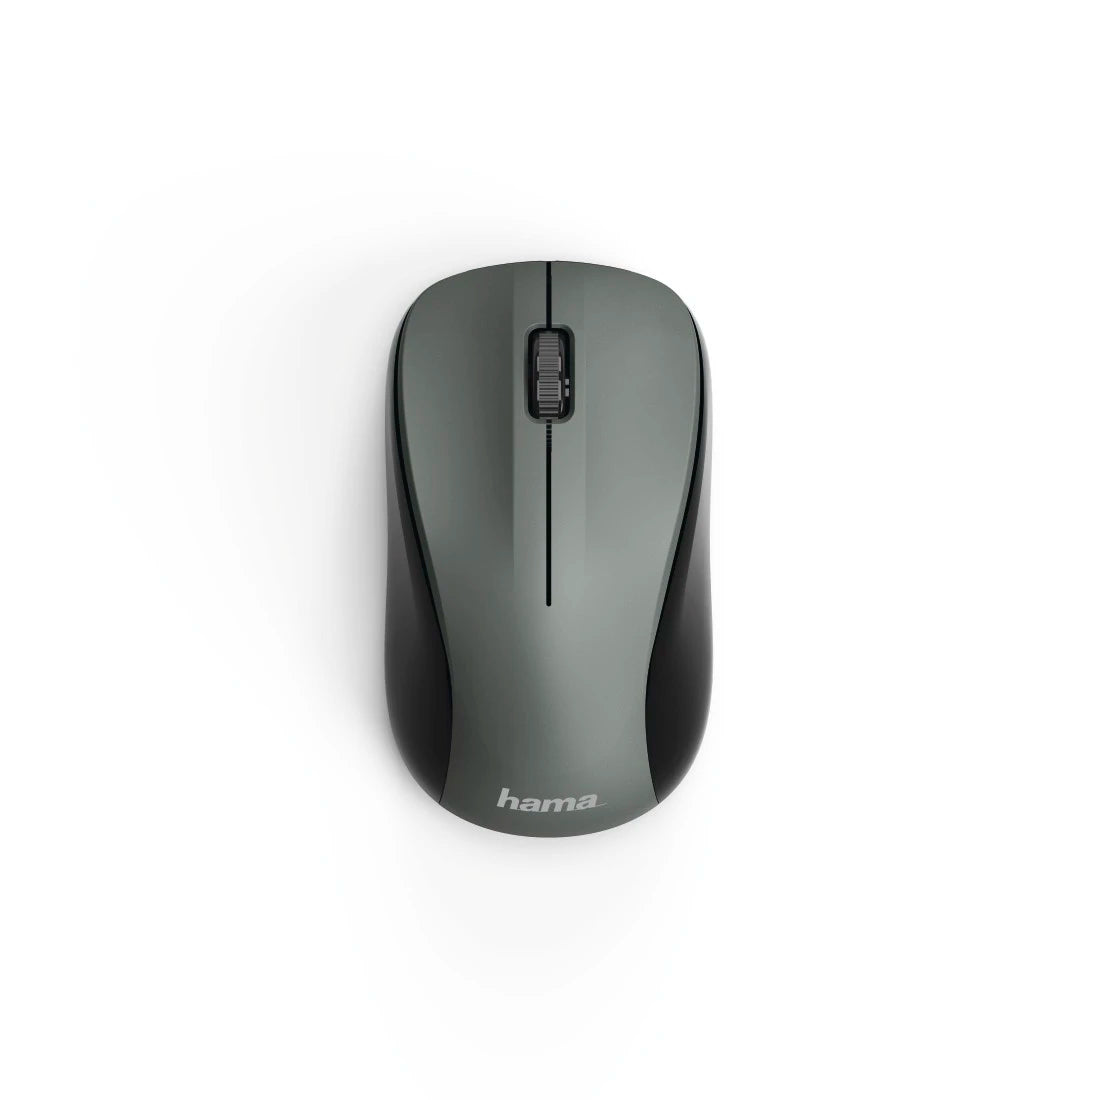 Hama MW-300 Optical Wireless Mouse with 3 Buttons - Anthracite Grey | 371645 from Hama - DID Electrical